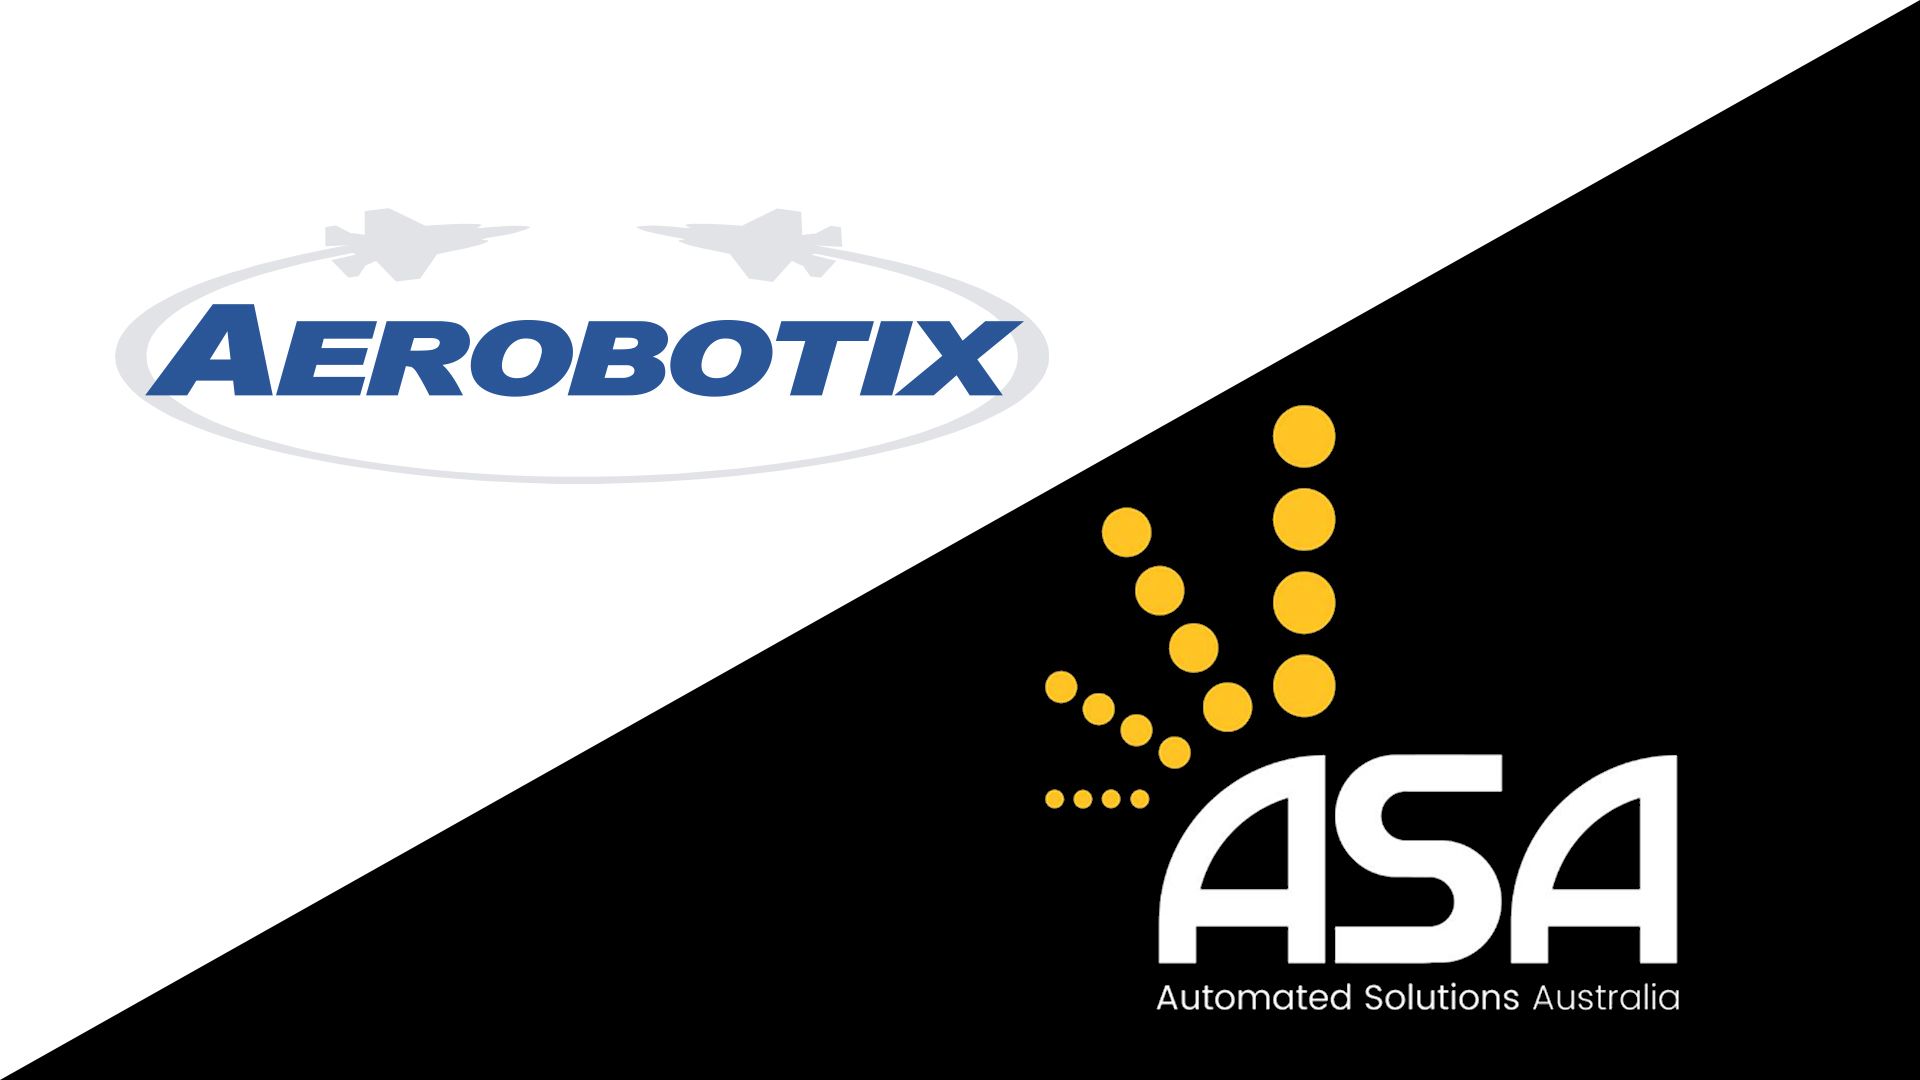 The thumbnail image for this article shows Aerobotix's logo in the upper-left corner with a white background, while Automated Solution Australia's logo is in black, located in the lower right-hand corner.